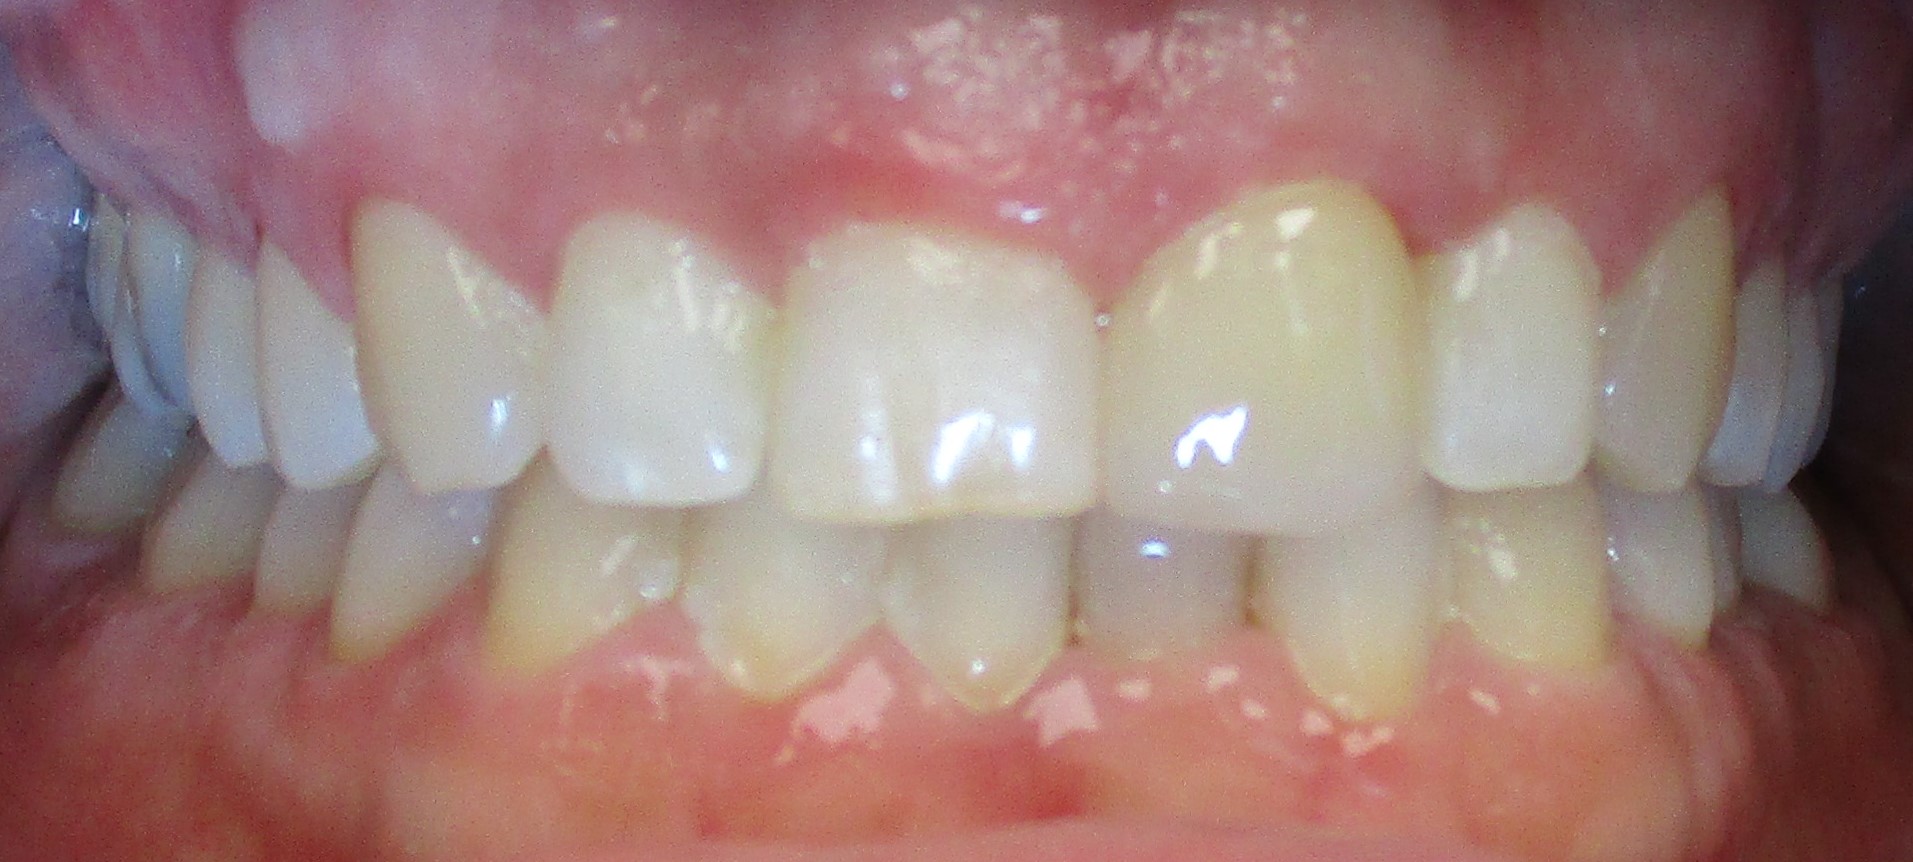 CROOKED FRONT TOOTH FIXED INVISALIGN